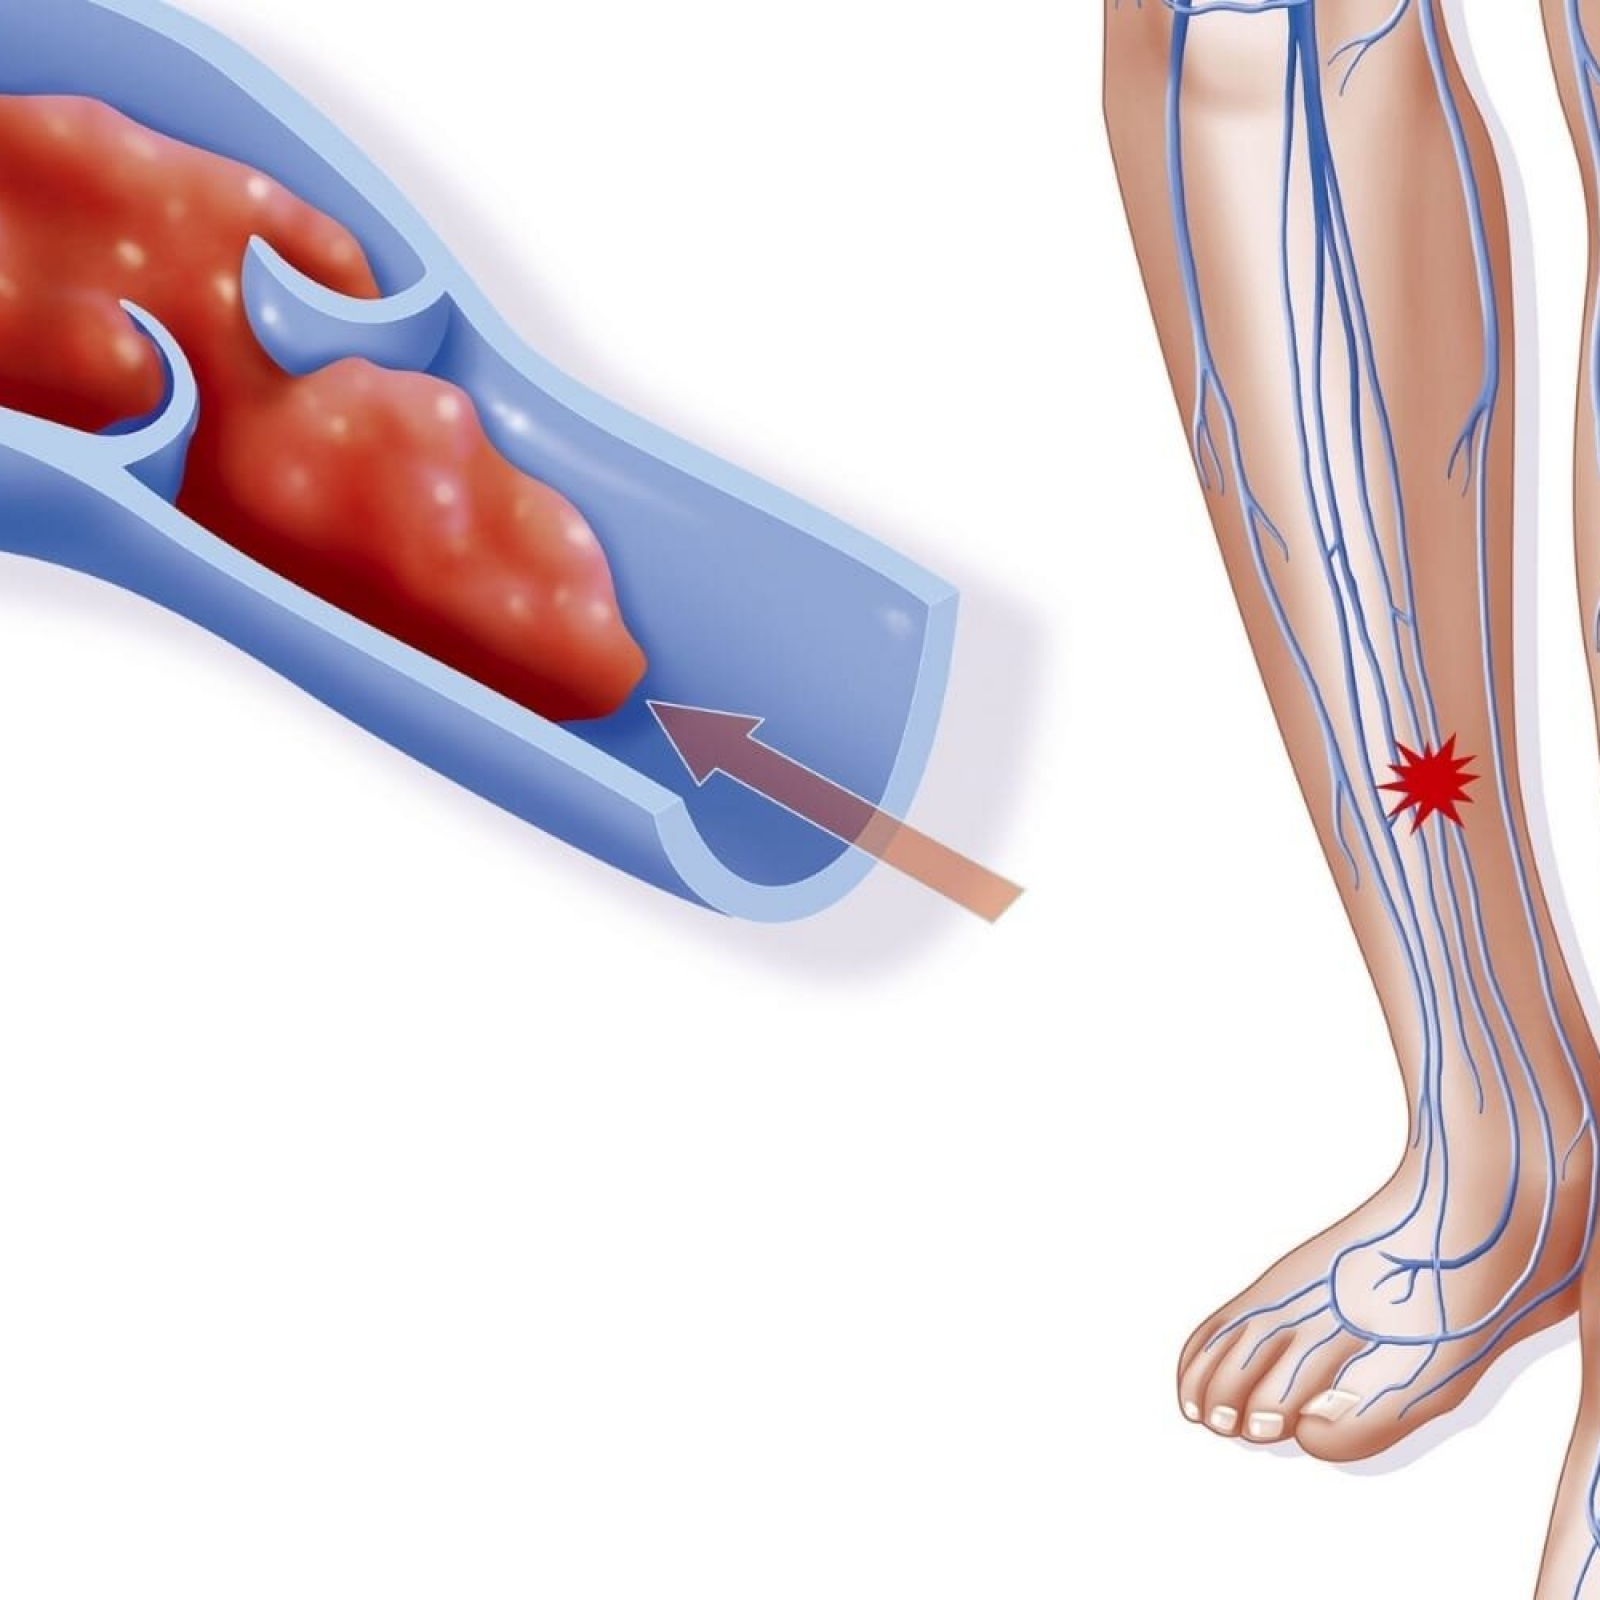 Is it possible to treat deep vein thrombosis without anticoagulant therapy?